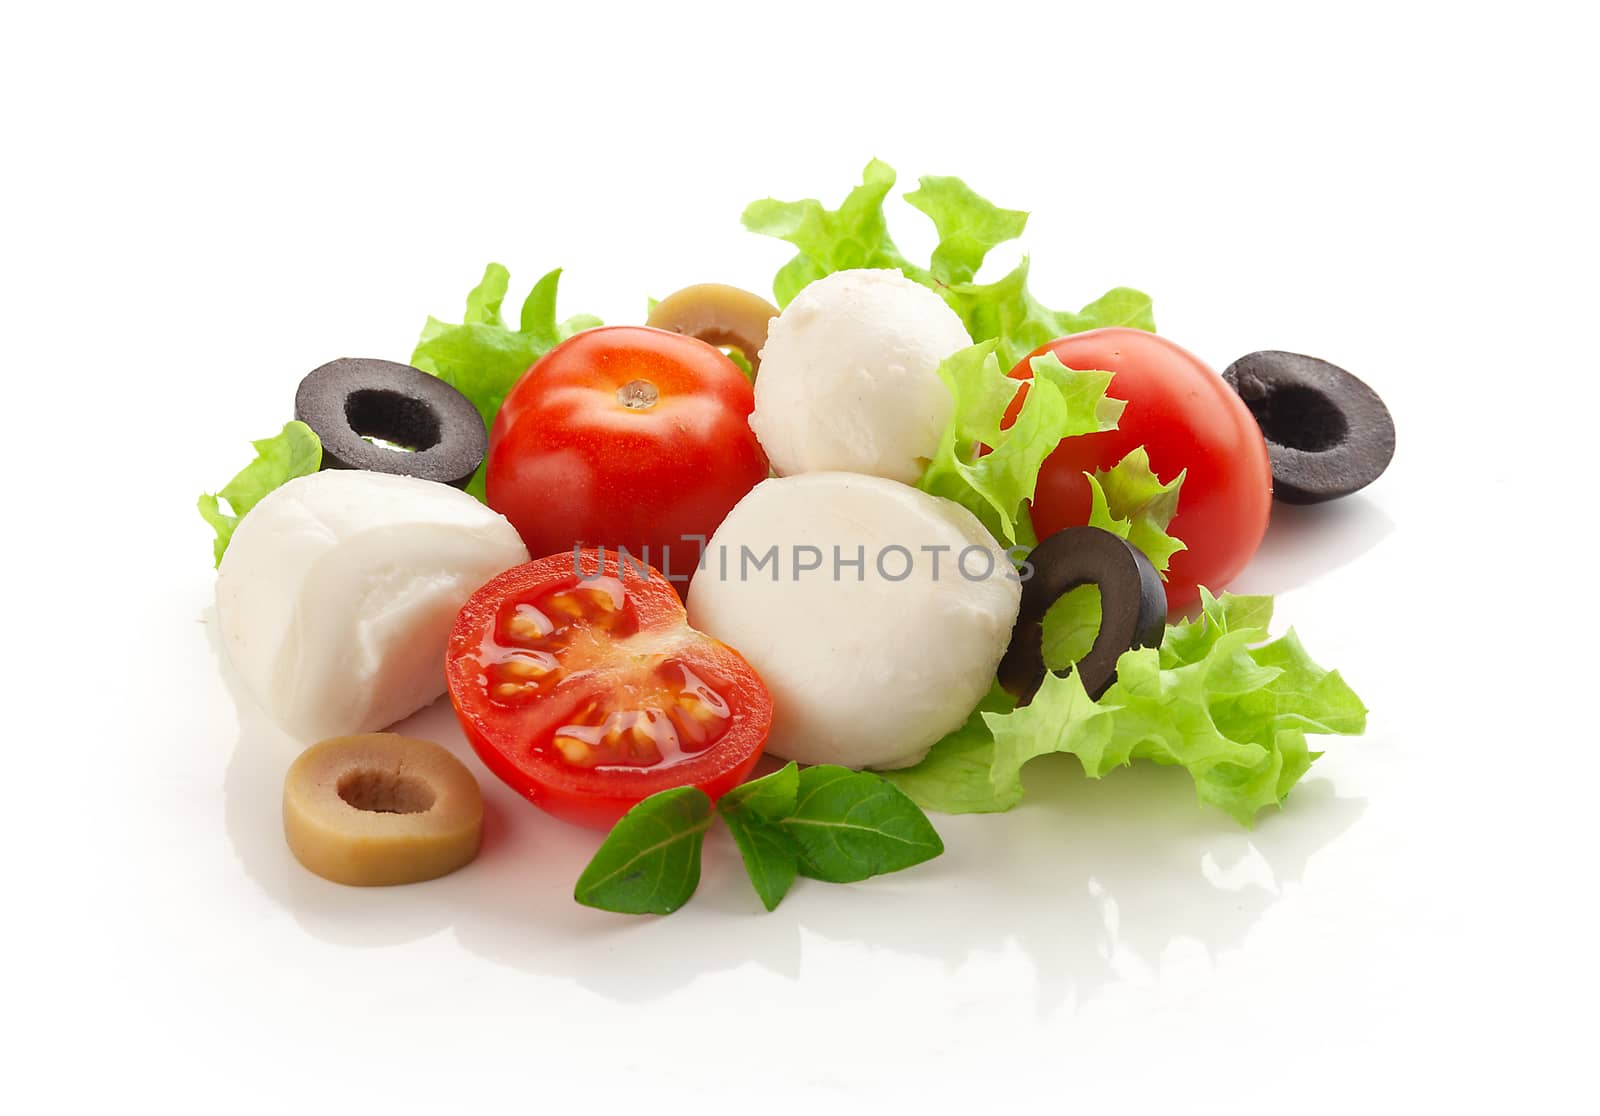 Some balls of mozzarella with tomato cherry, olives and fresh green lettuce